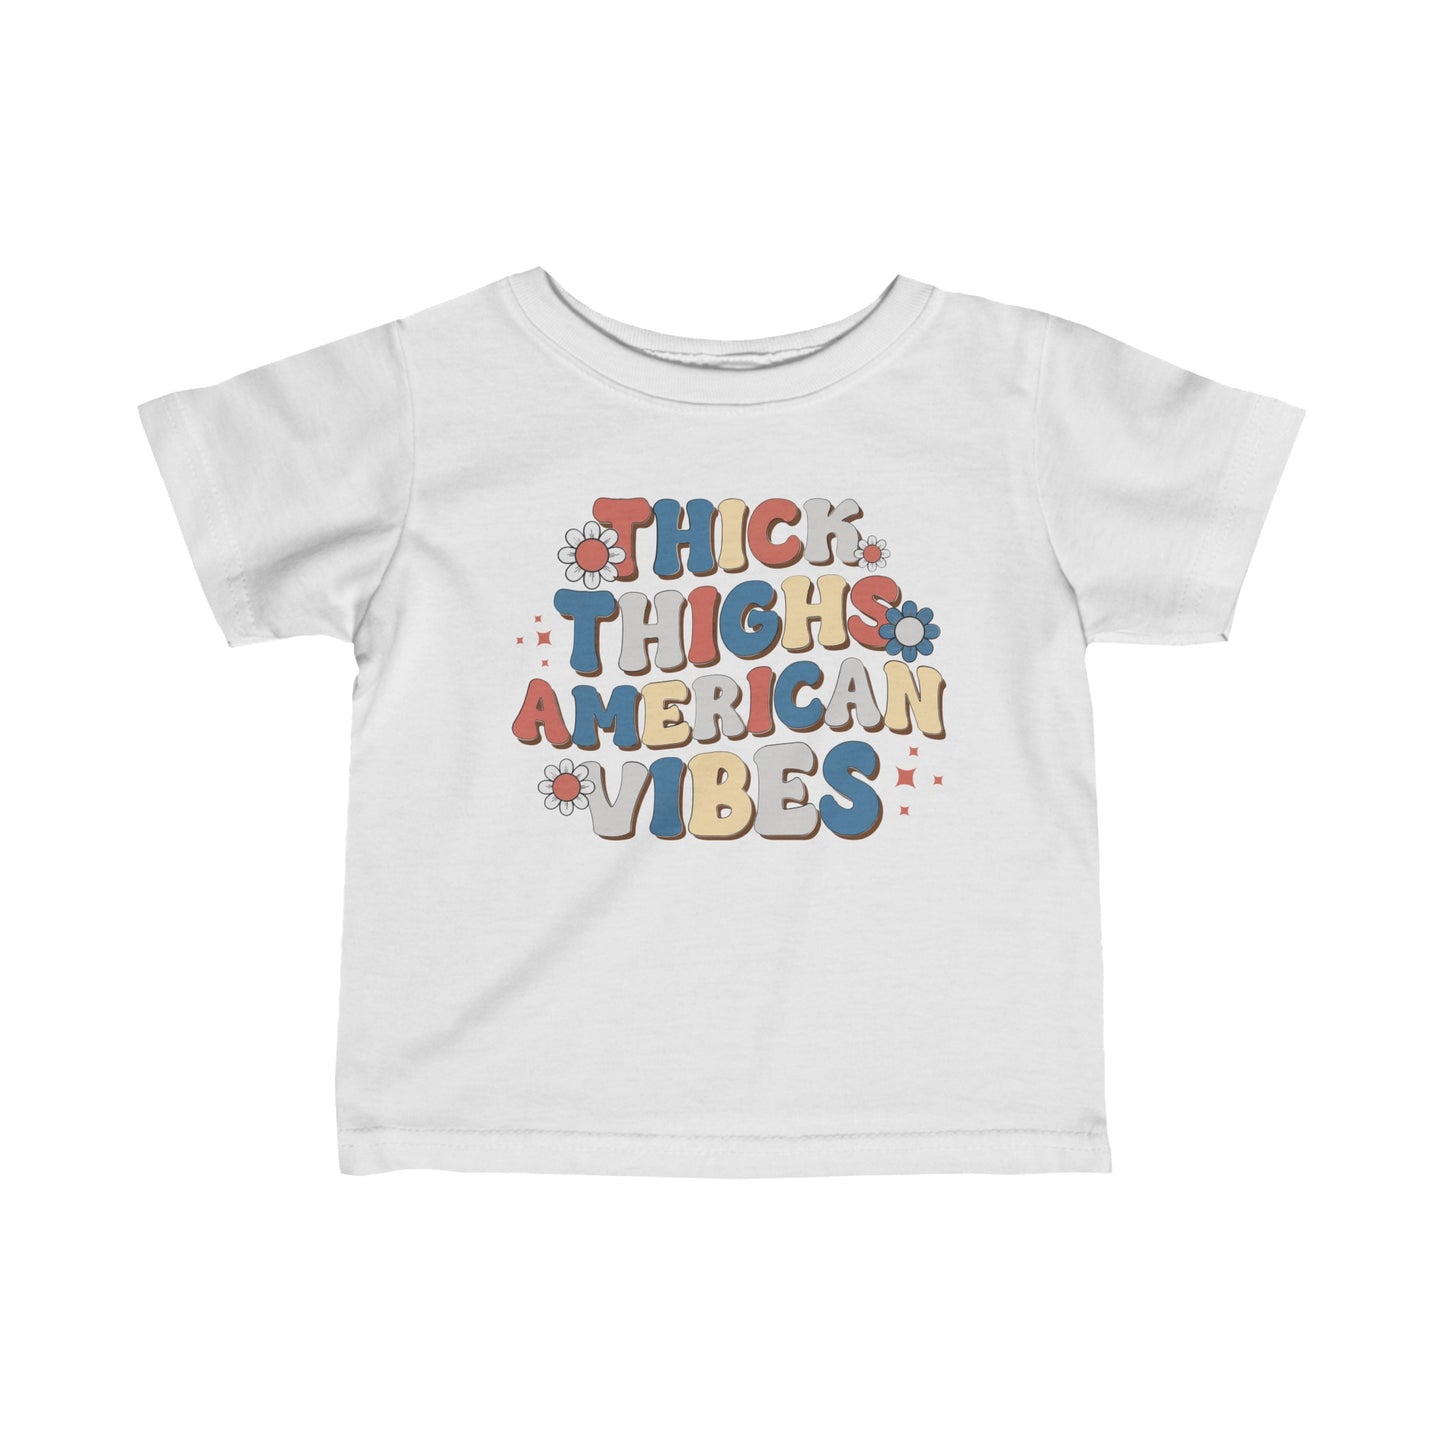 Thick Thighs American Vibes Tee